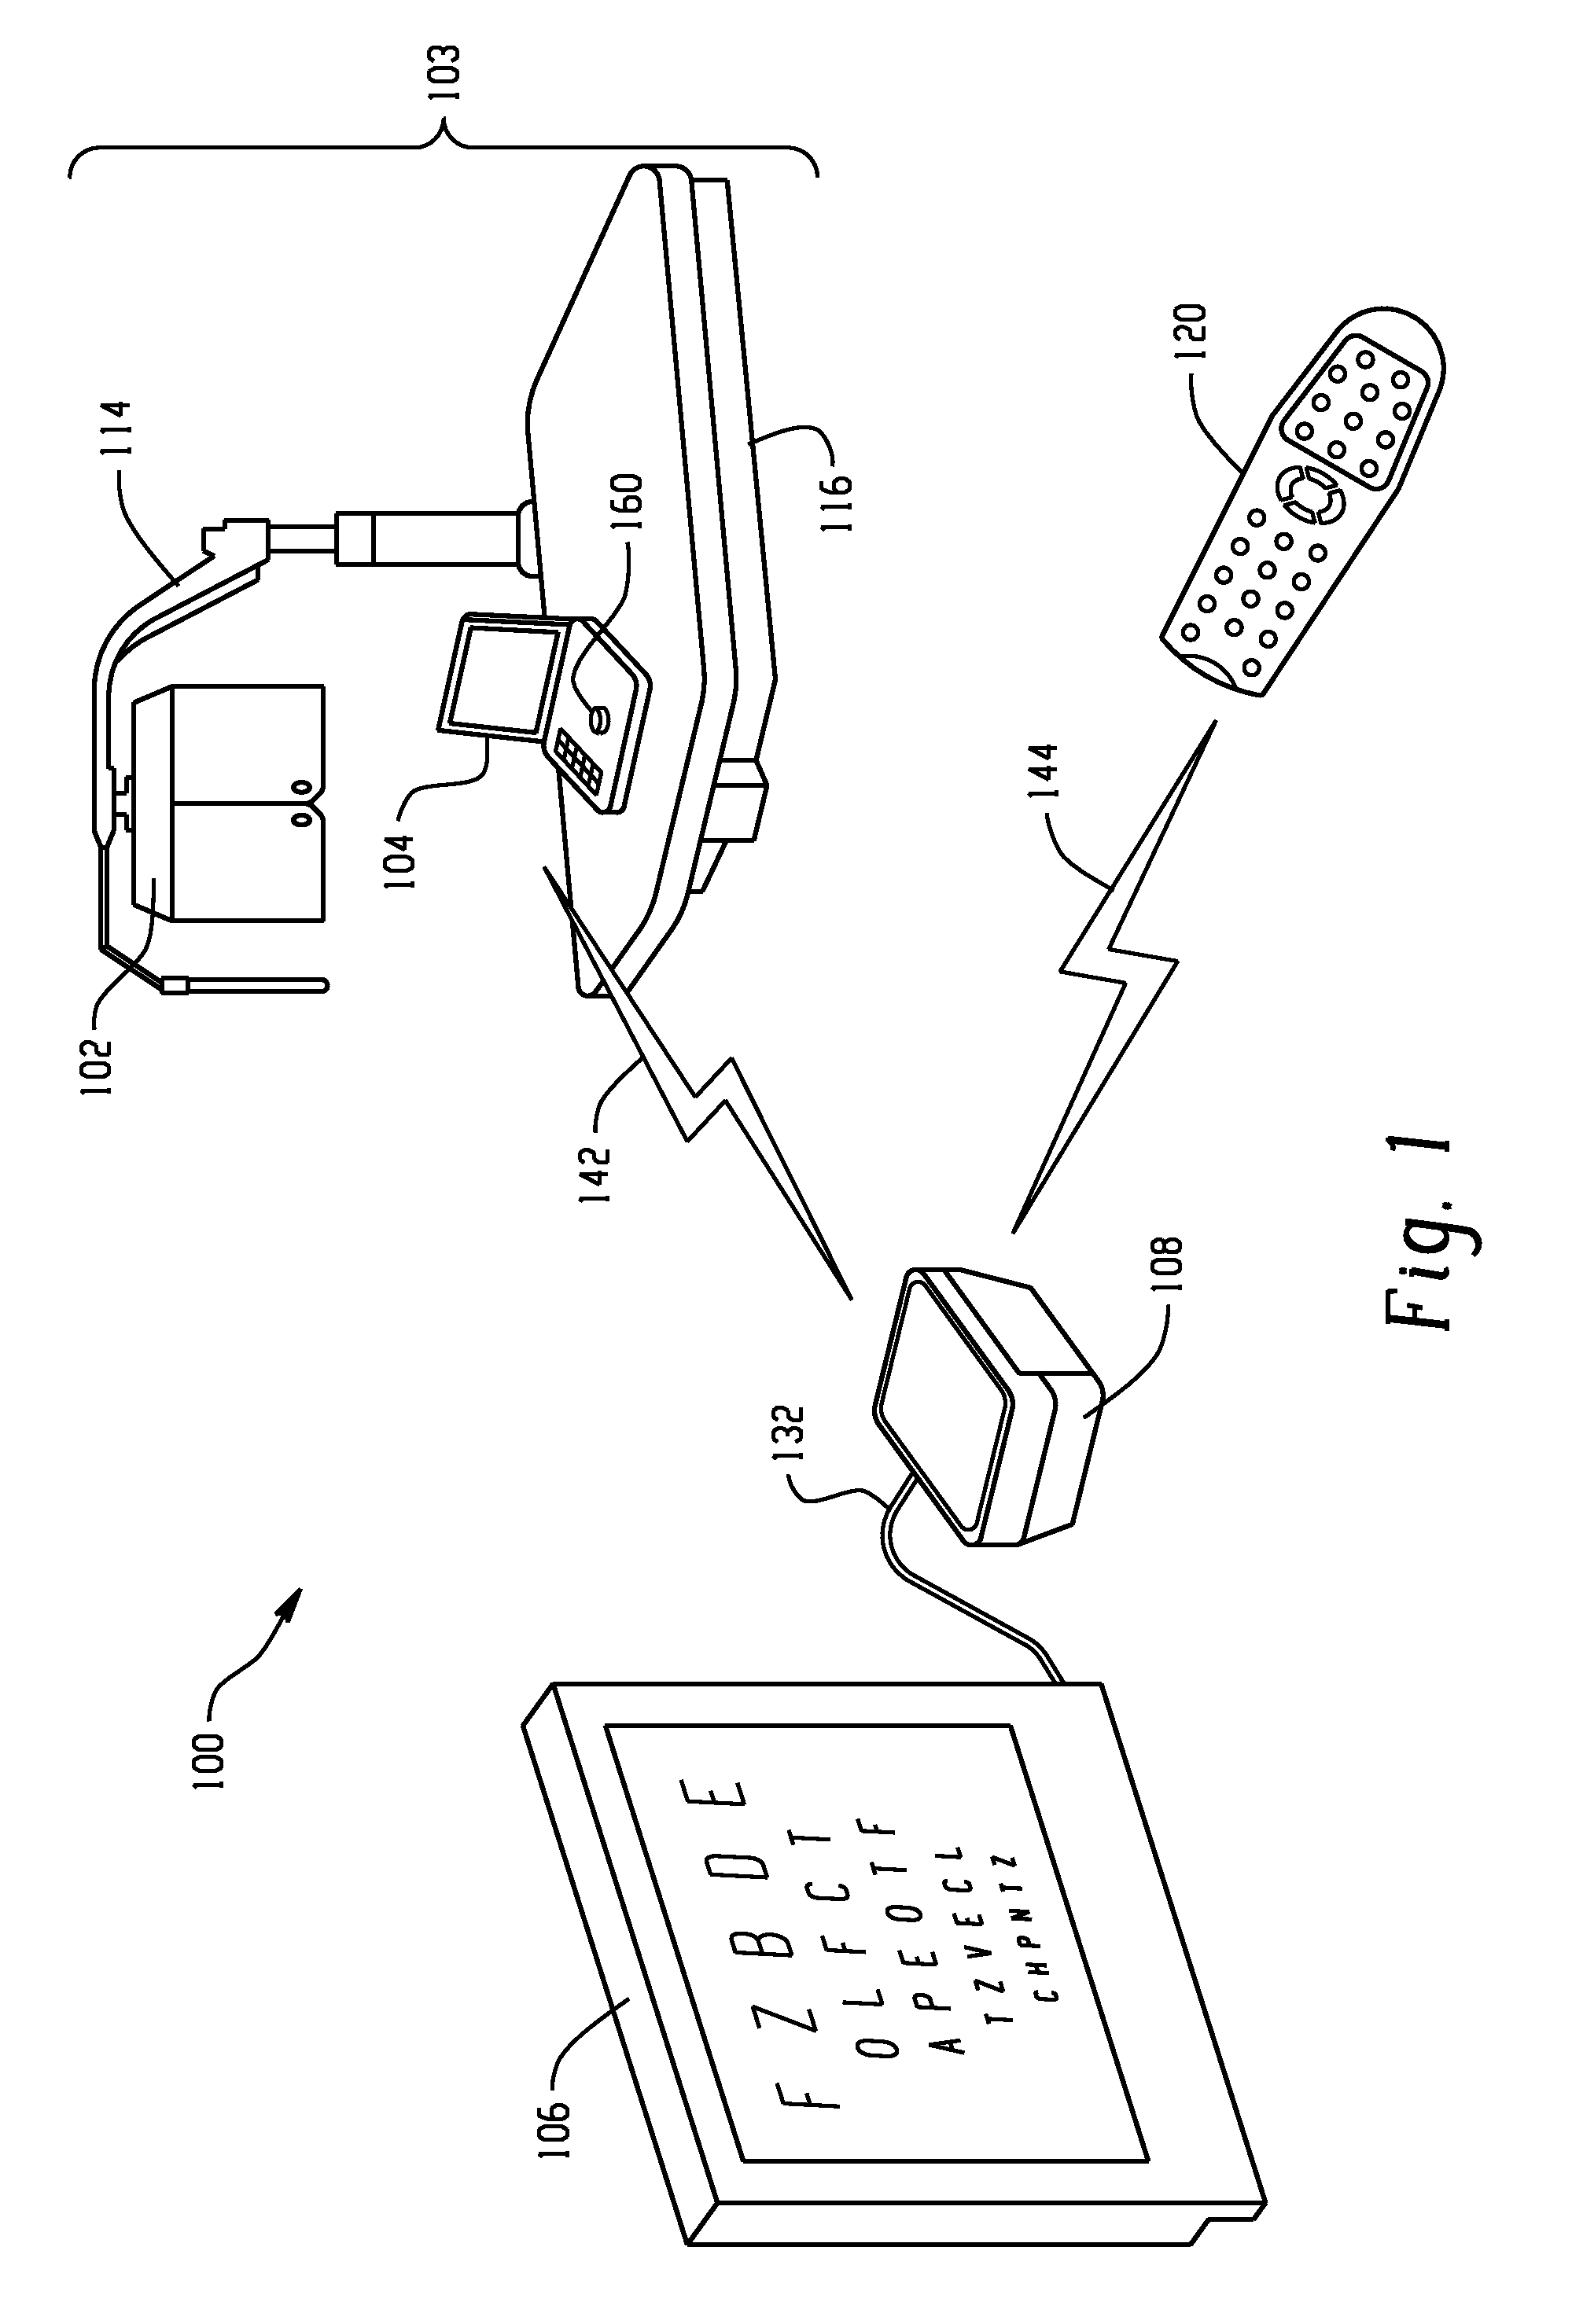 Ophthalmic examination system wireless interface device